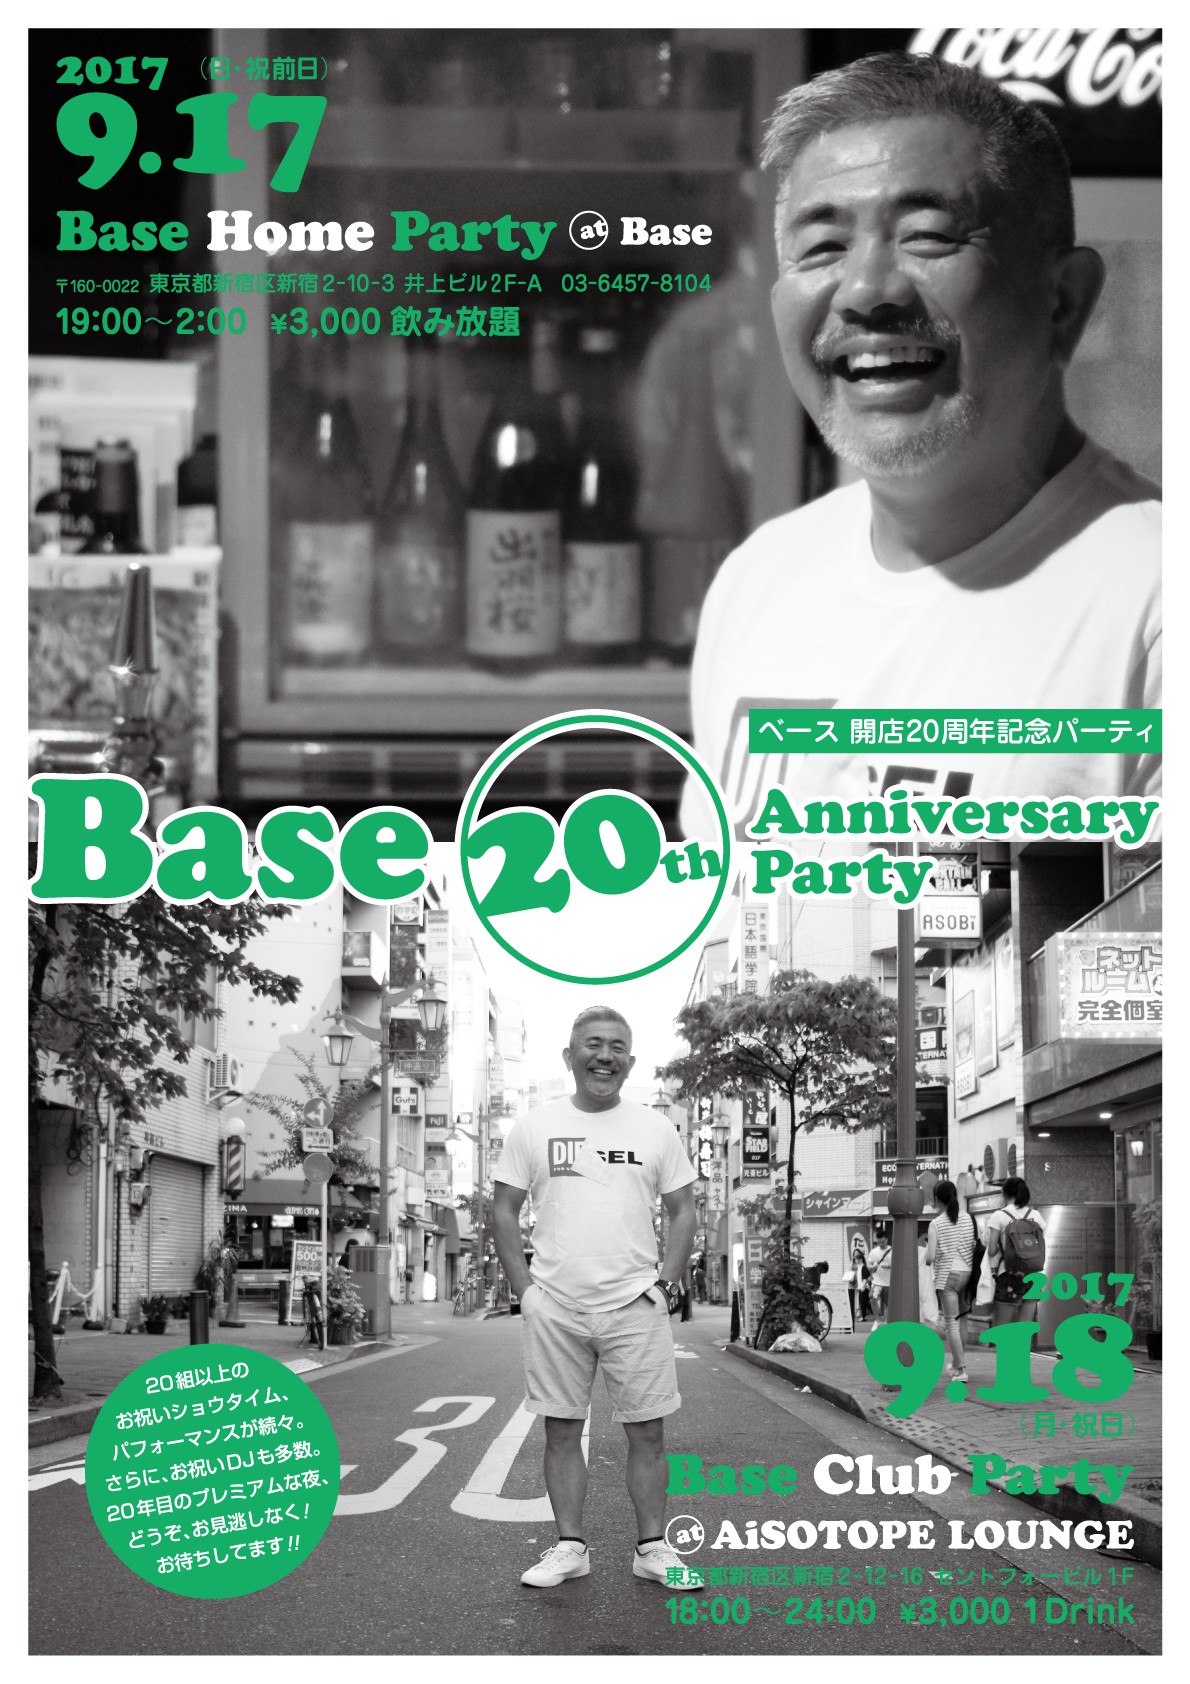 「Base 20th Anniversary Party」